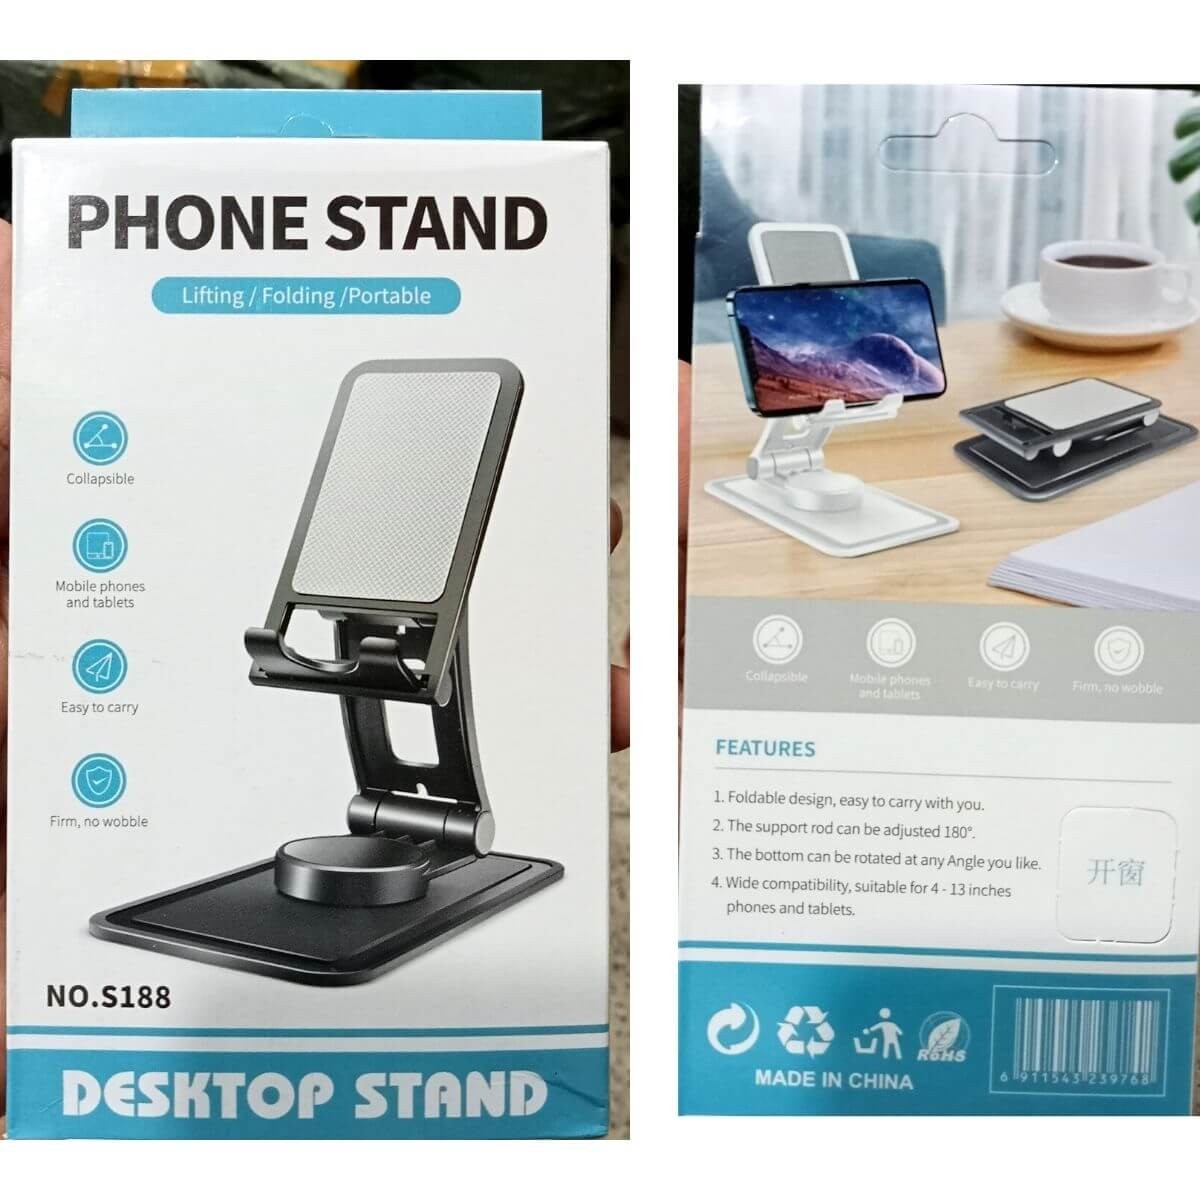 S188 Lifting Folding Portable PHONE STAND BD